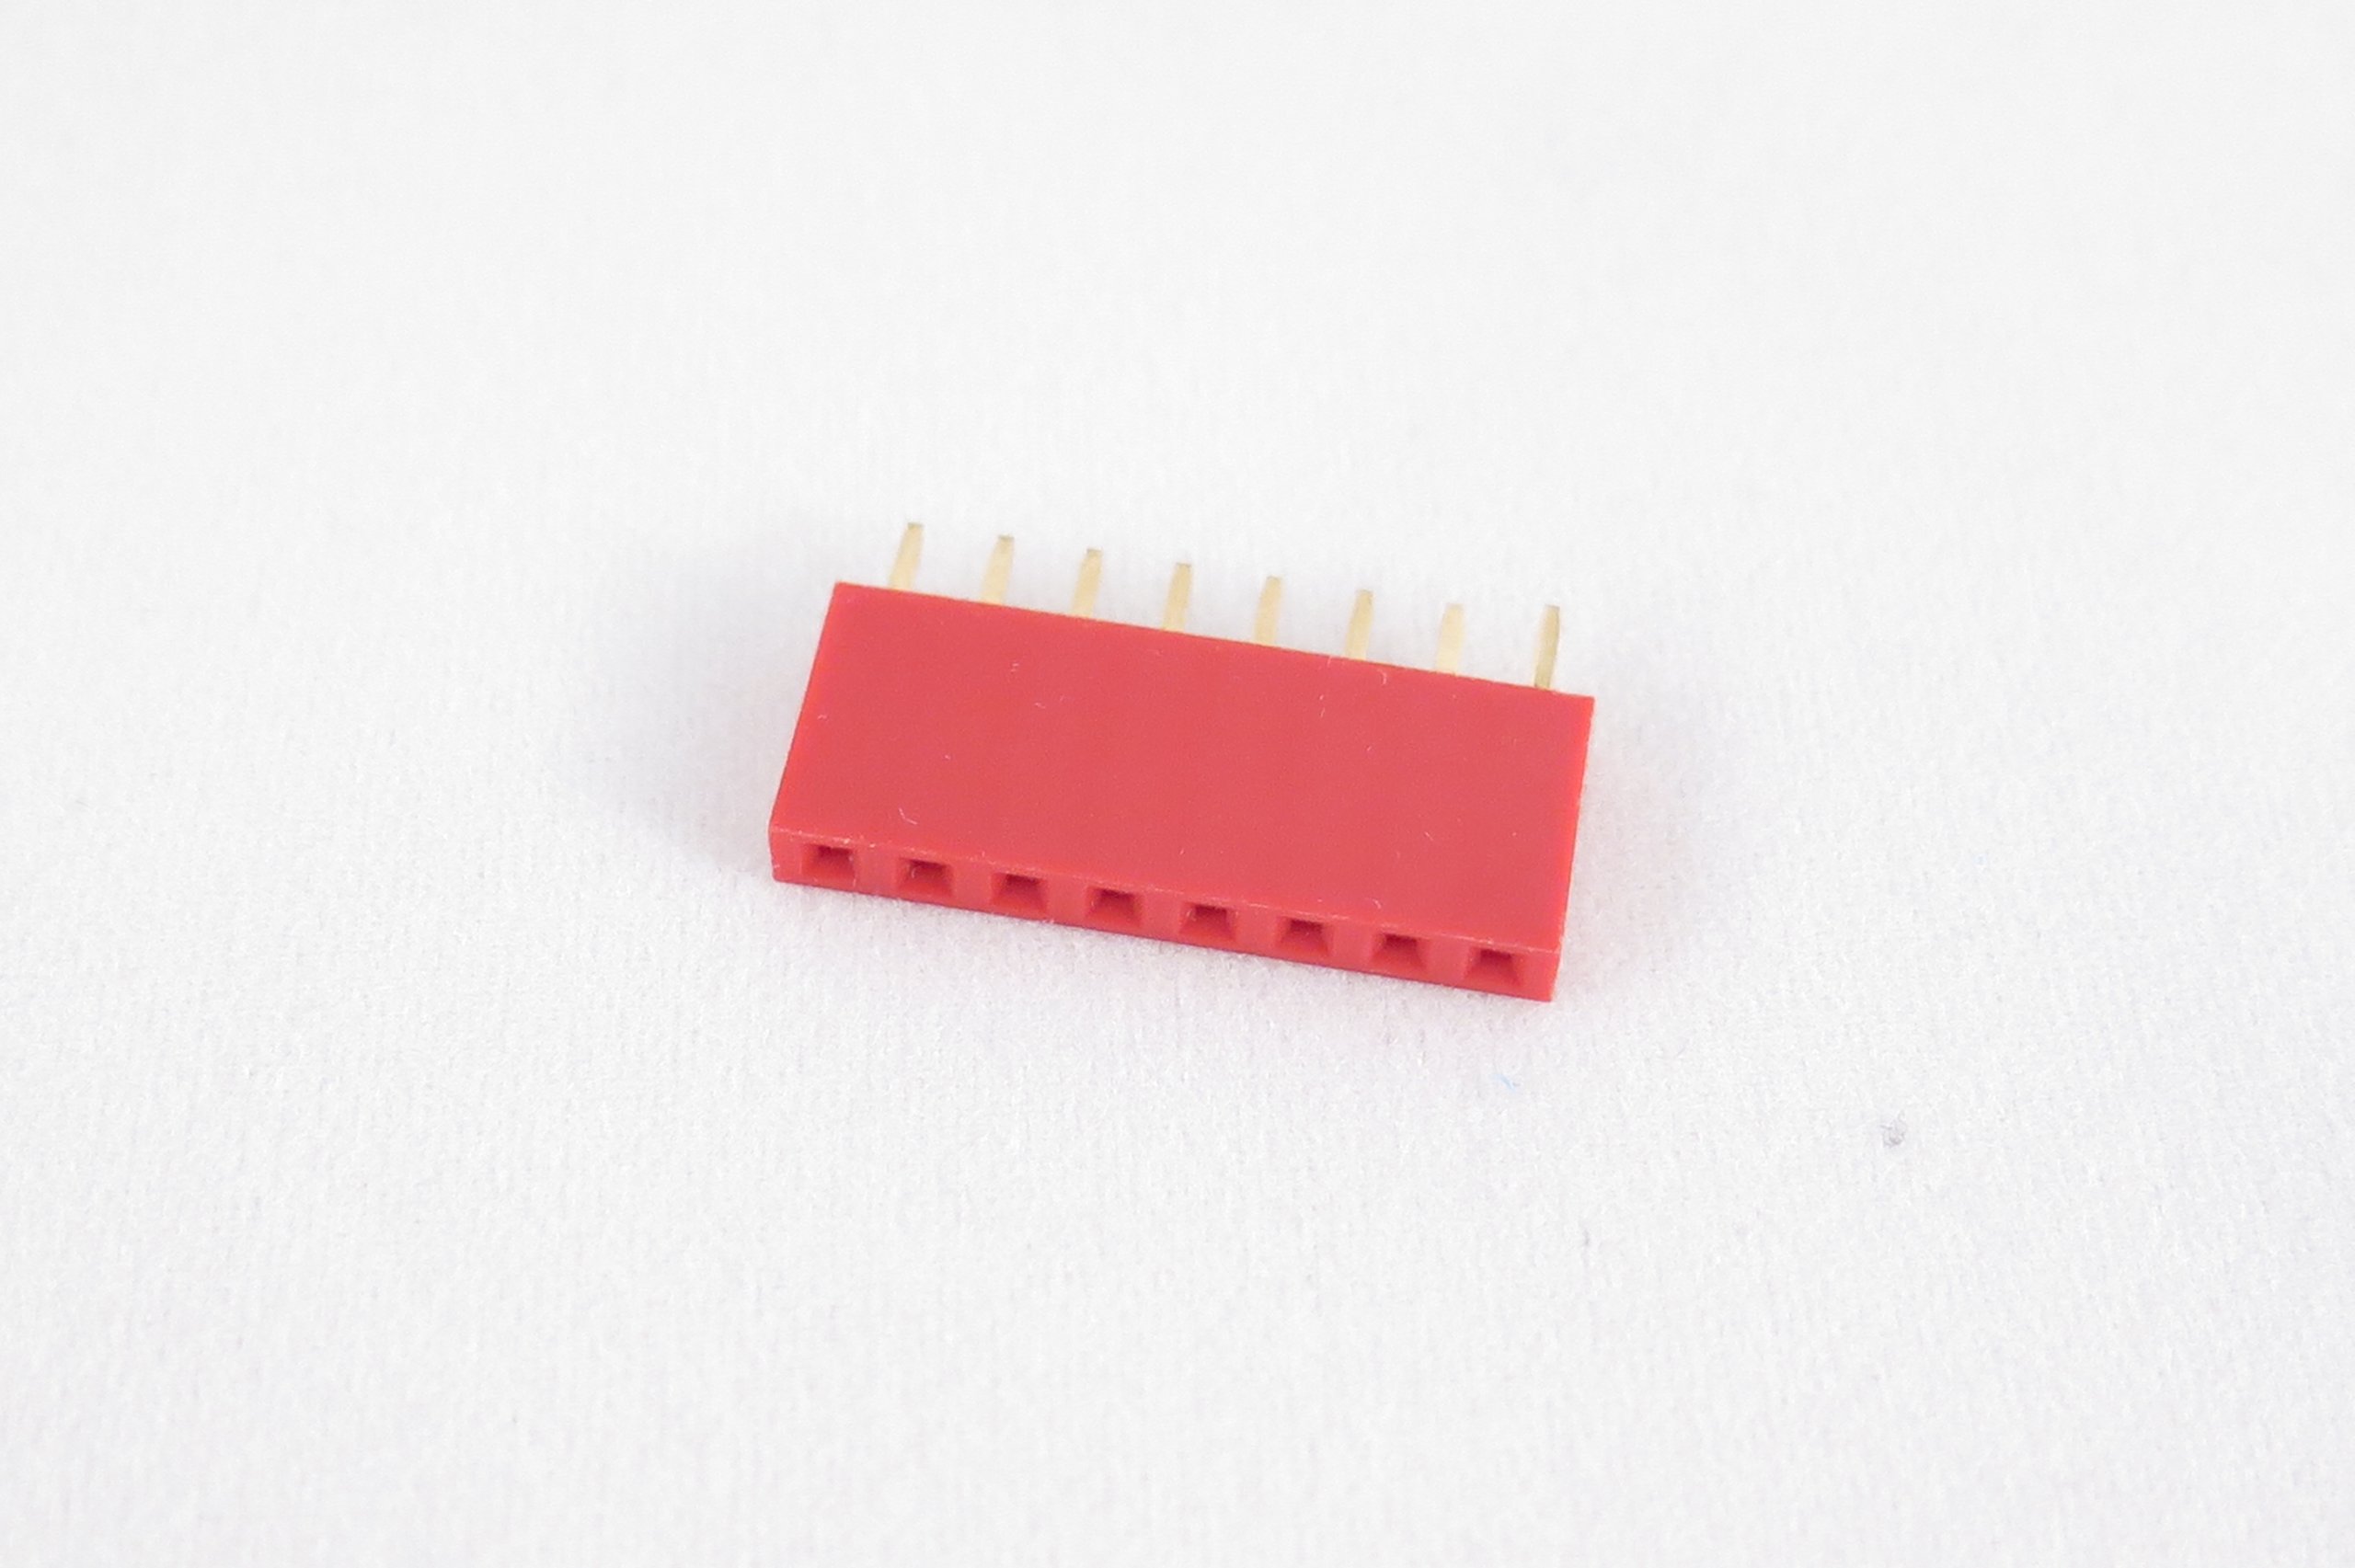 Set of 10 red female pin headers, 8 pins from FemtoCow on Tindie